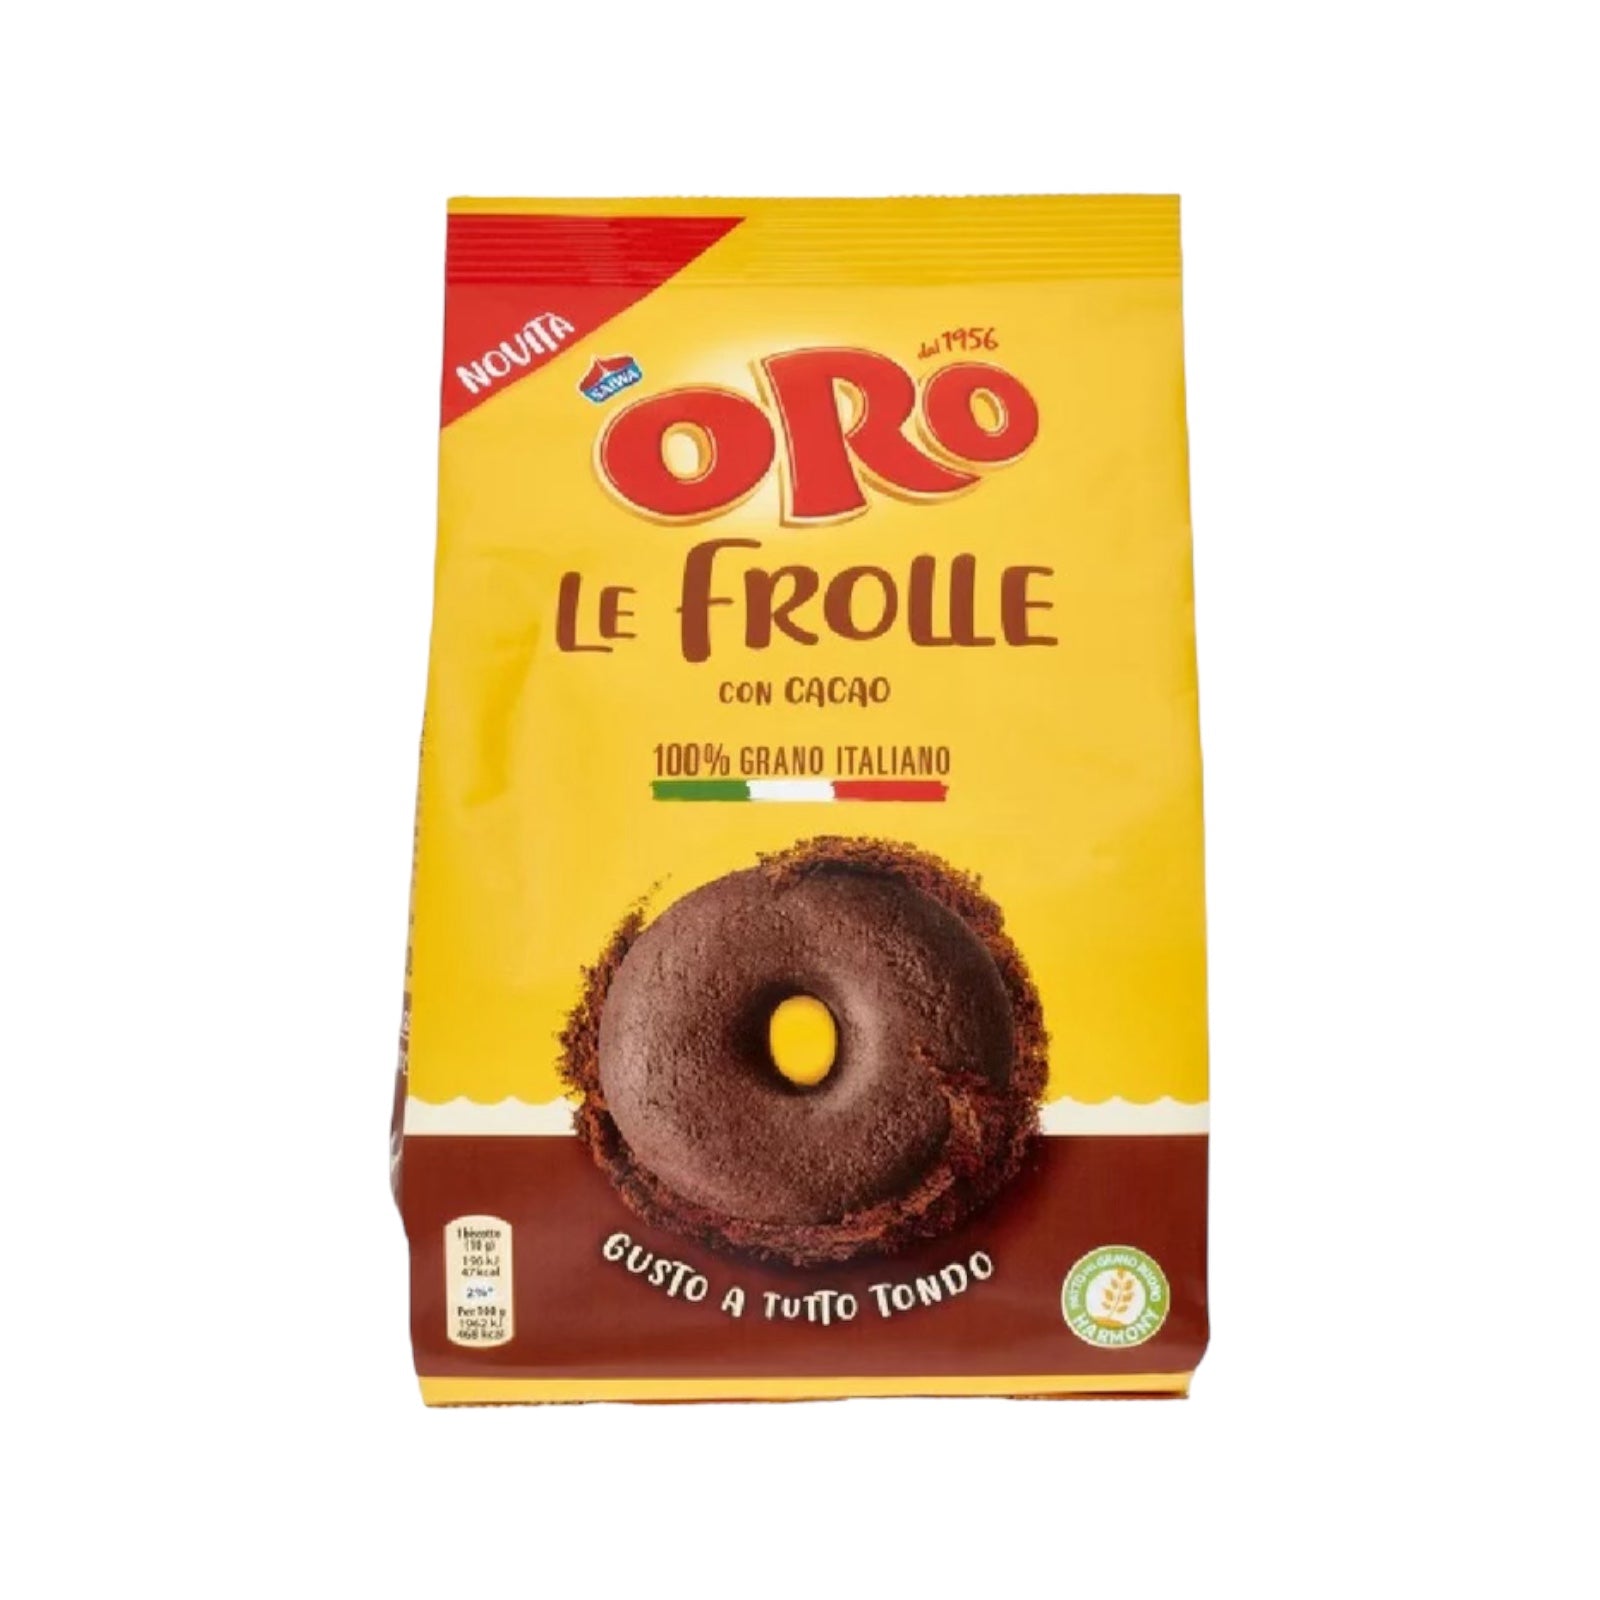 Saiwa Oro Le Frolle Cocoa Biscuits 300g